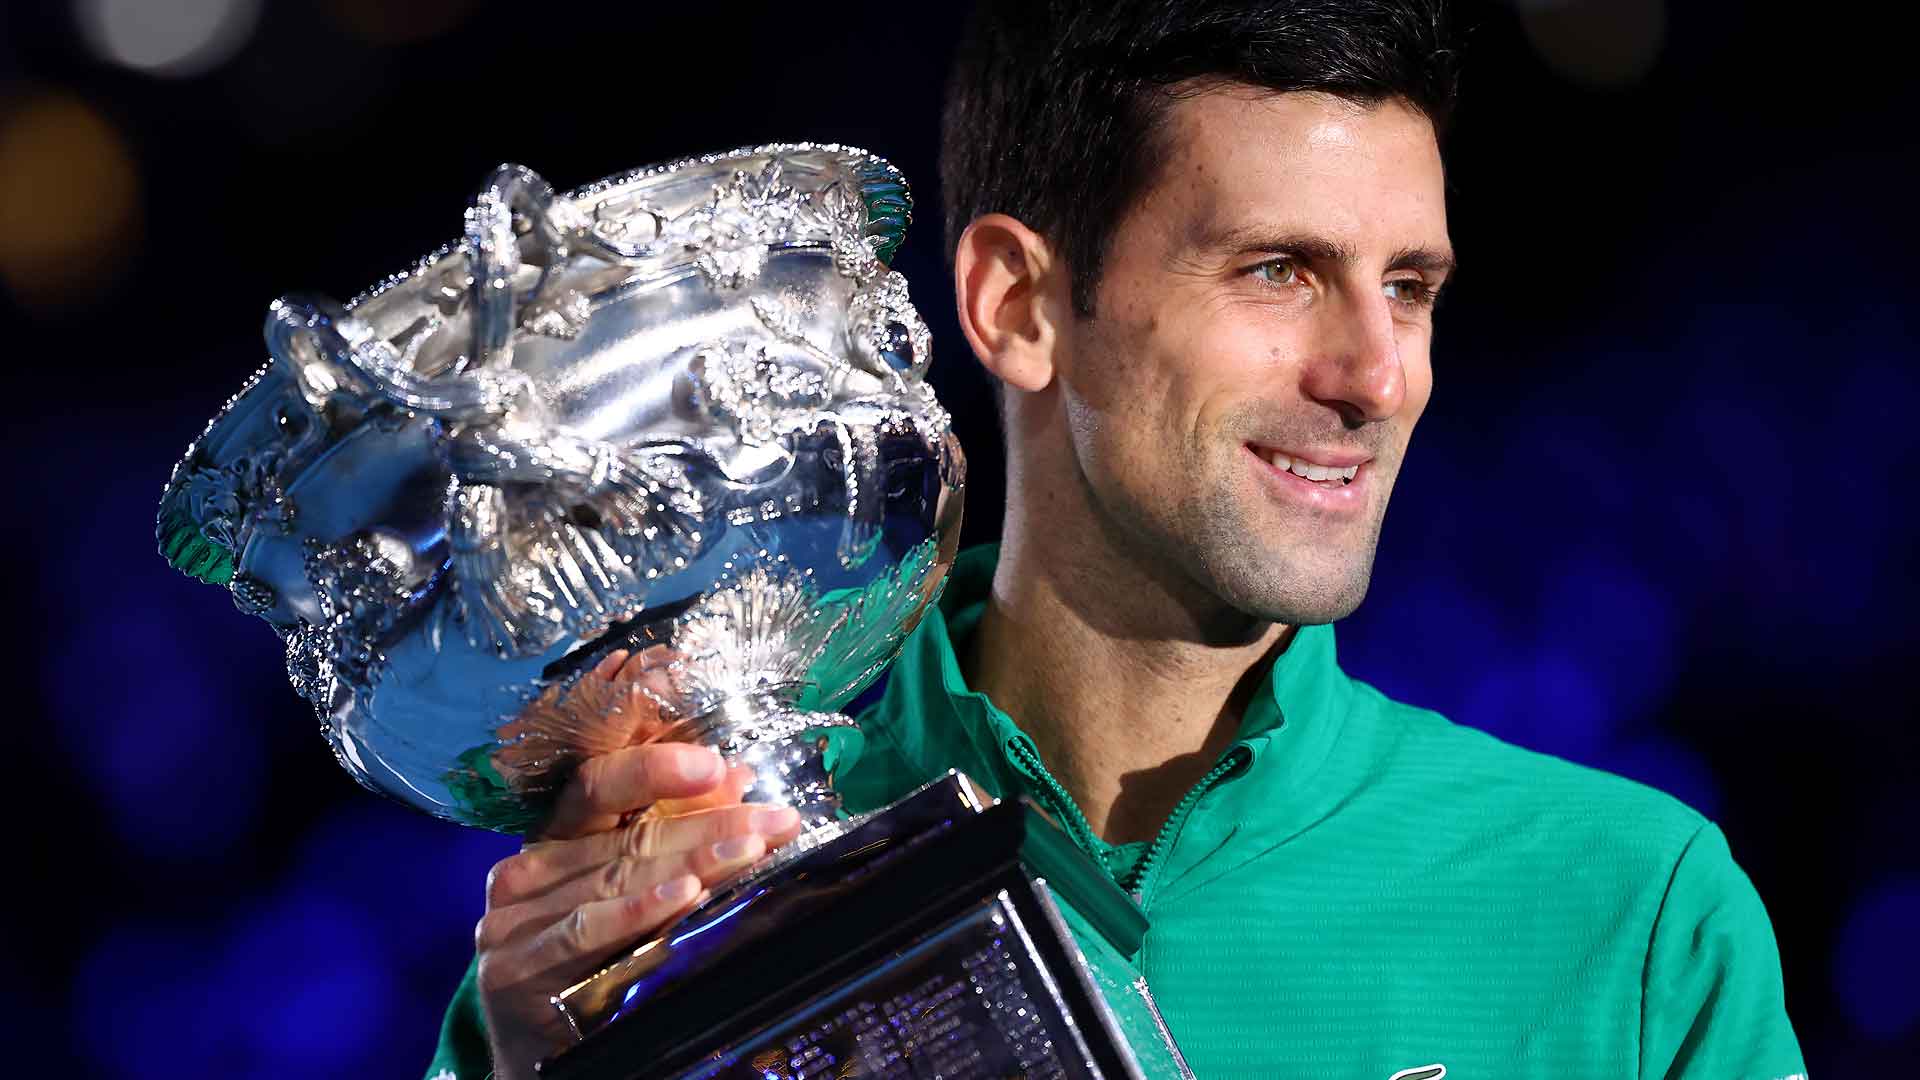 Novak Djokovic celebrates capturing a record eighth Australian Open crown on Sunday with victory over Dominic Thiem.